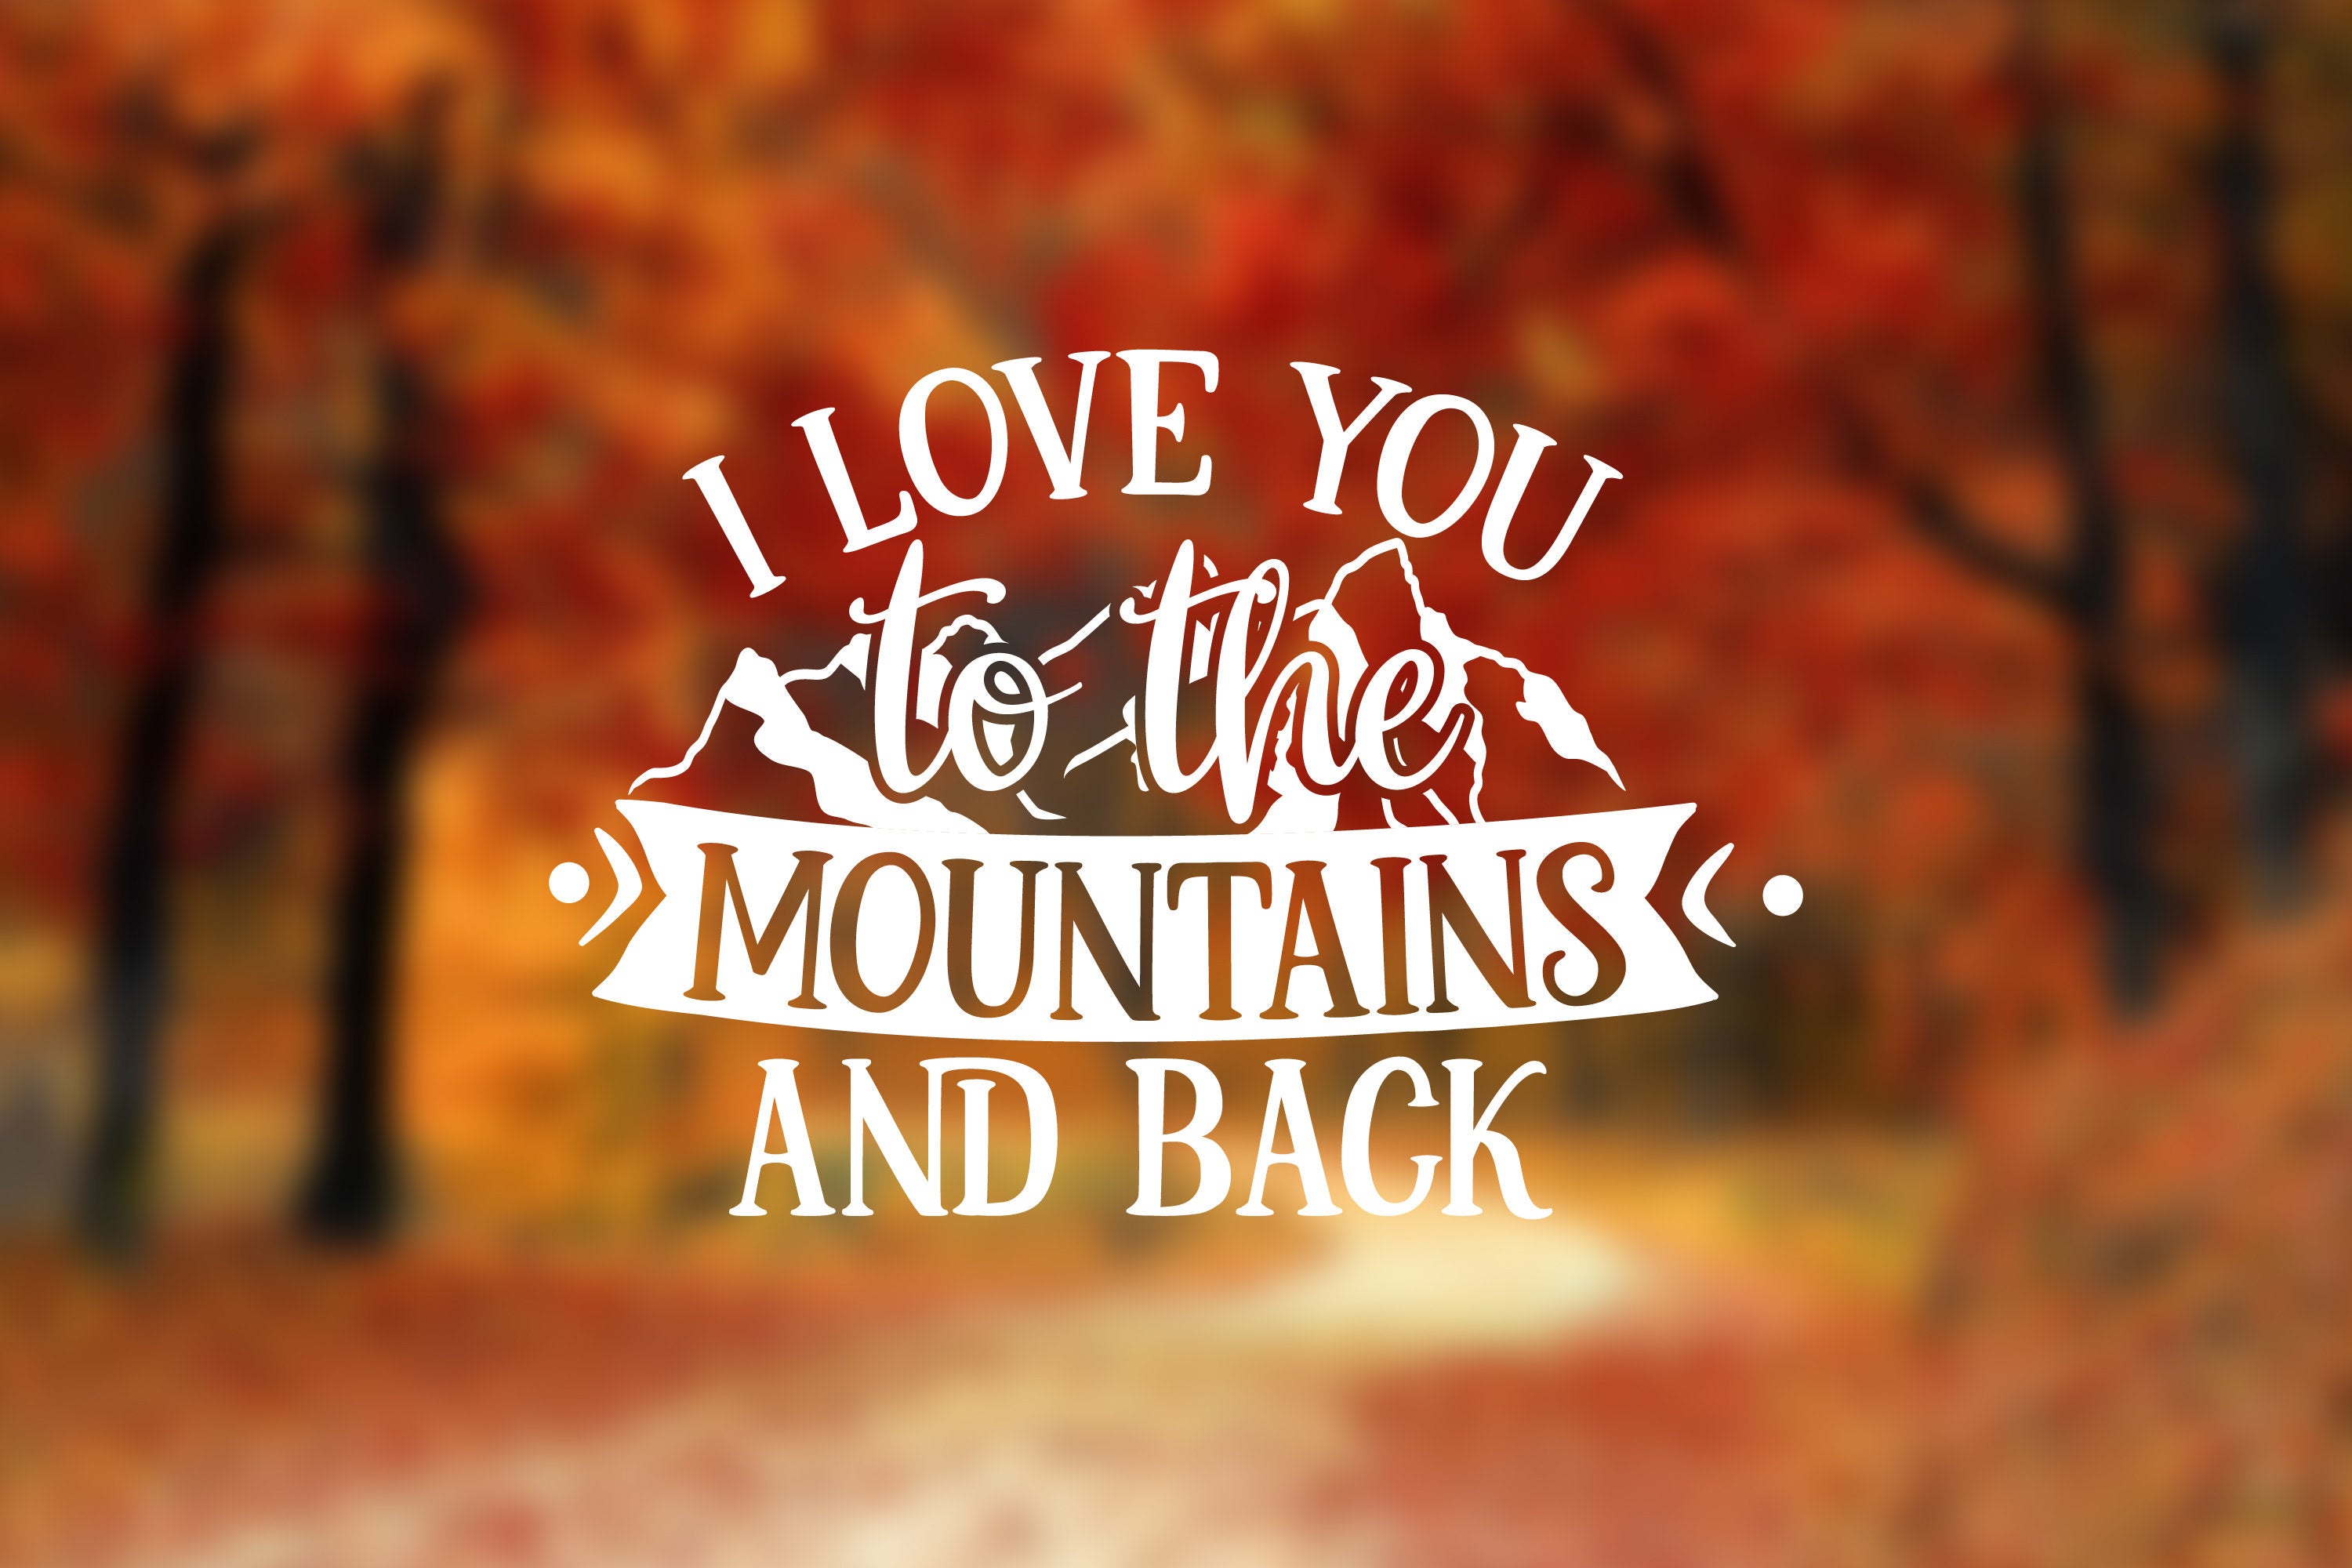 Car Vinyl Decal - I Love You to the Mountains and Back - Permanent Outdoor-Grade Vinyl Sticker for Vehicles, RV, Camper, Boat